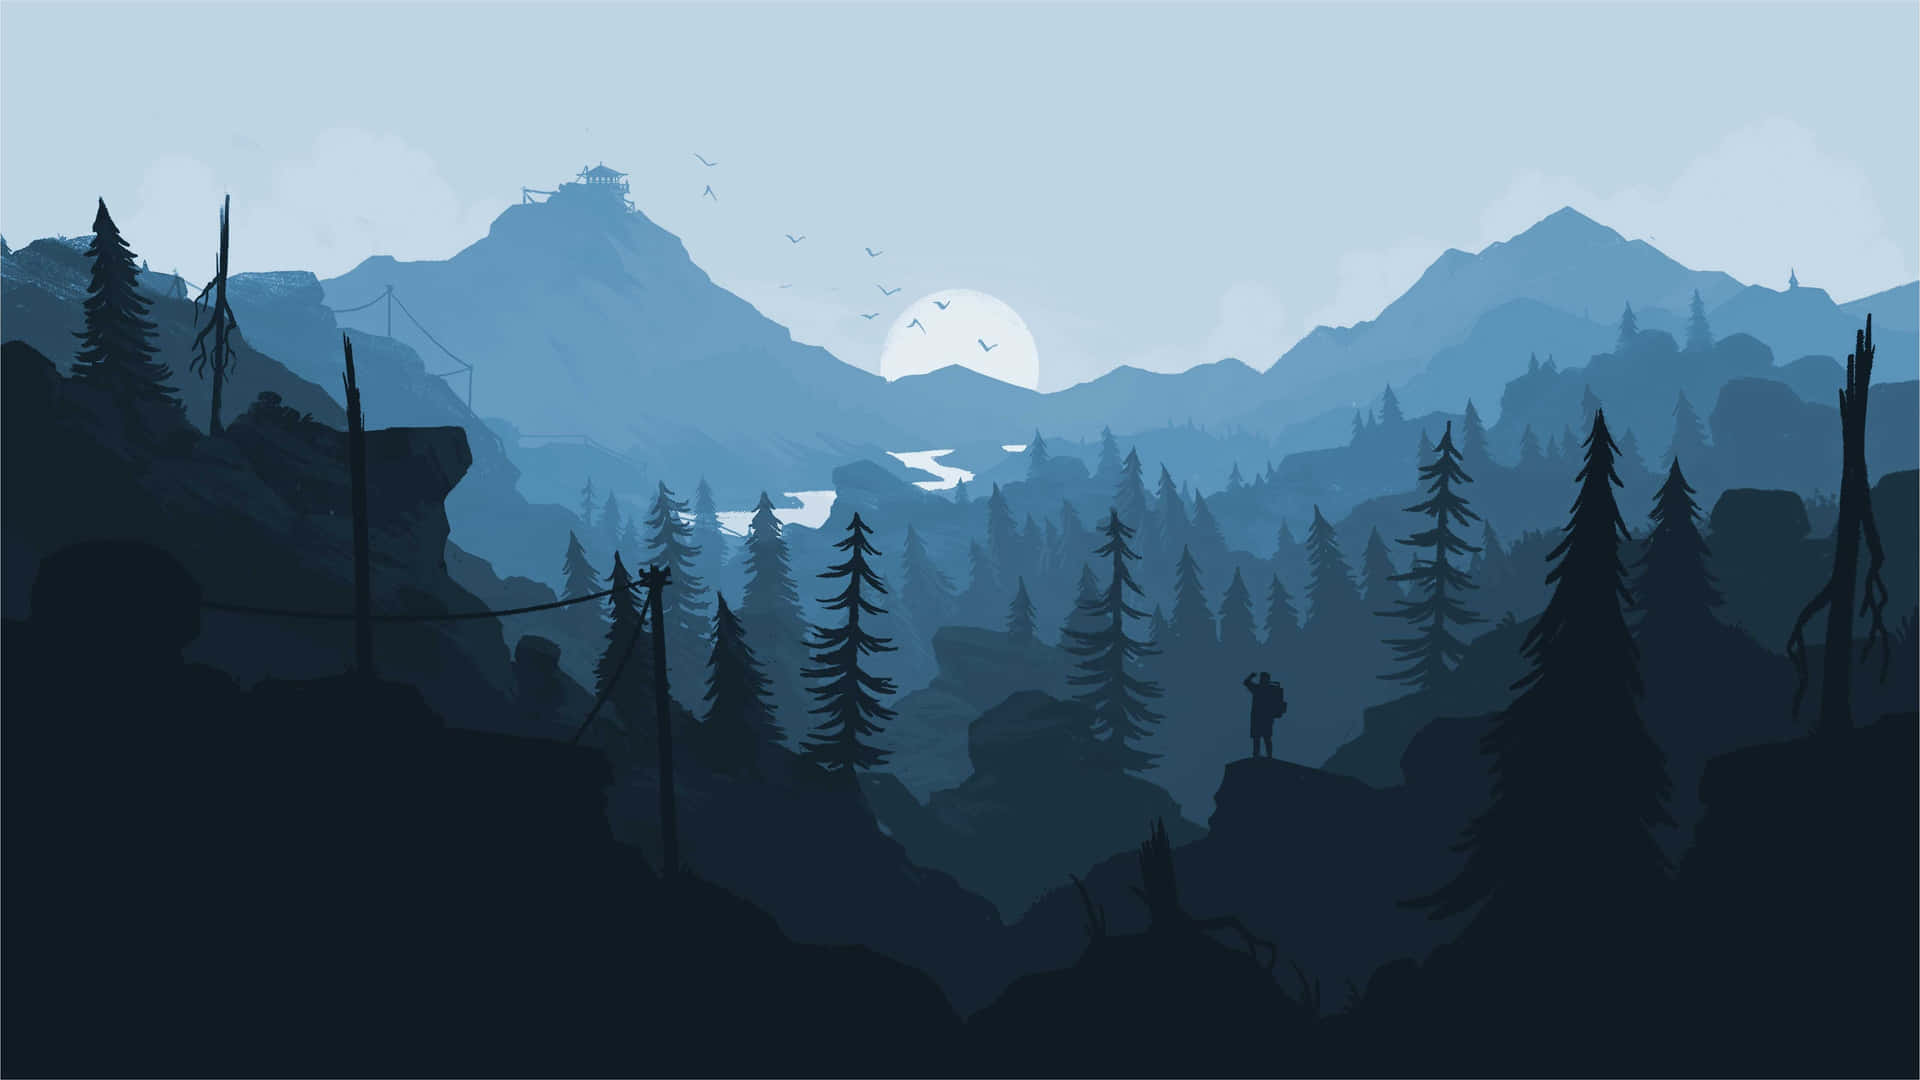 A Silhouette Of A Mountain With Trees And Mountains